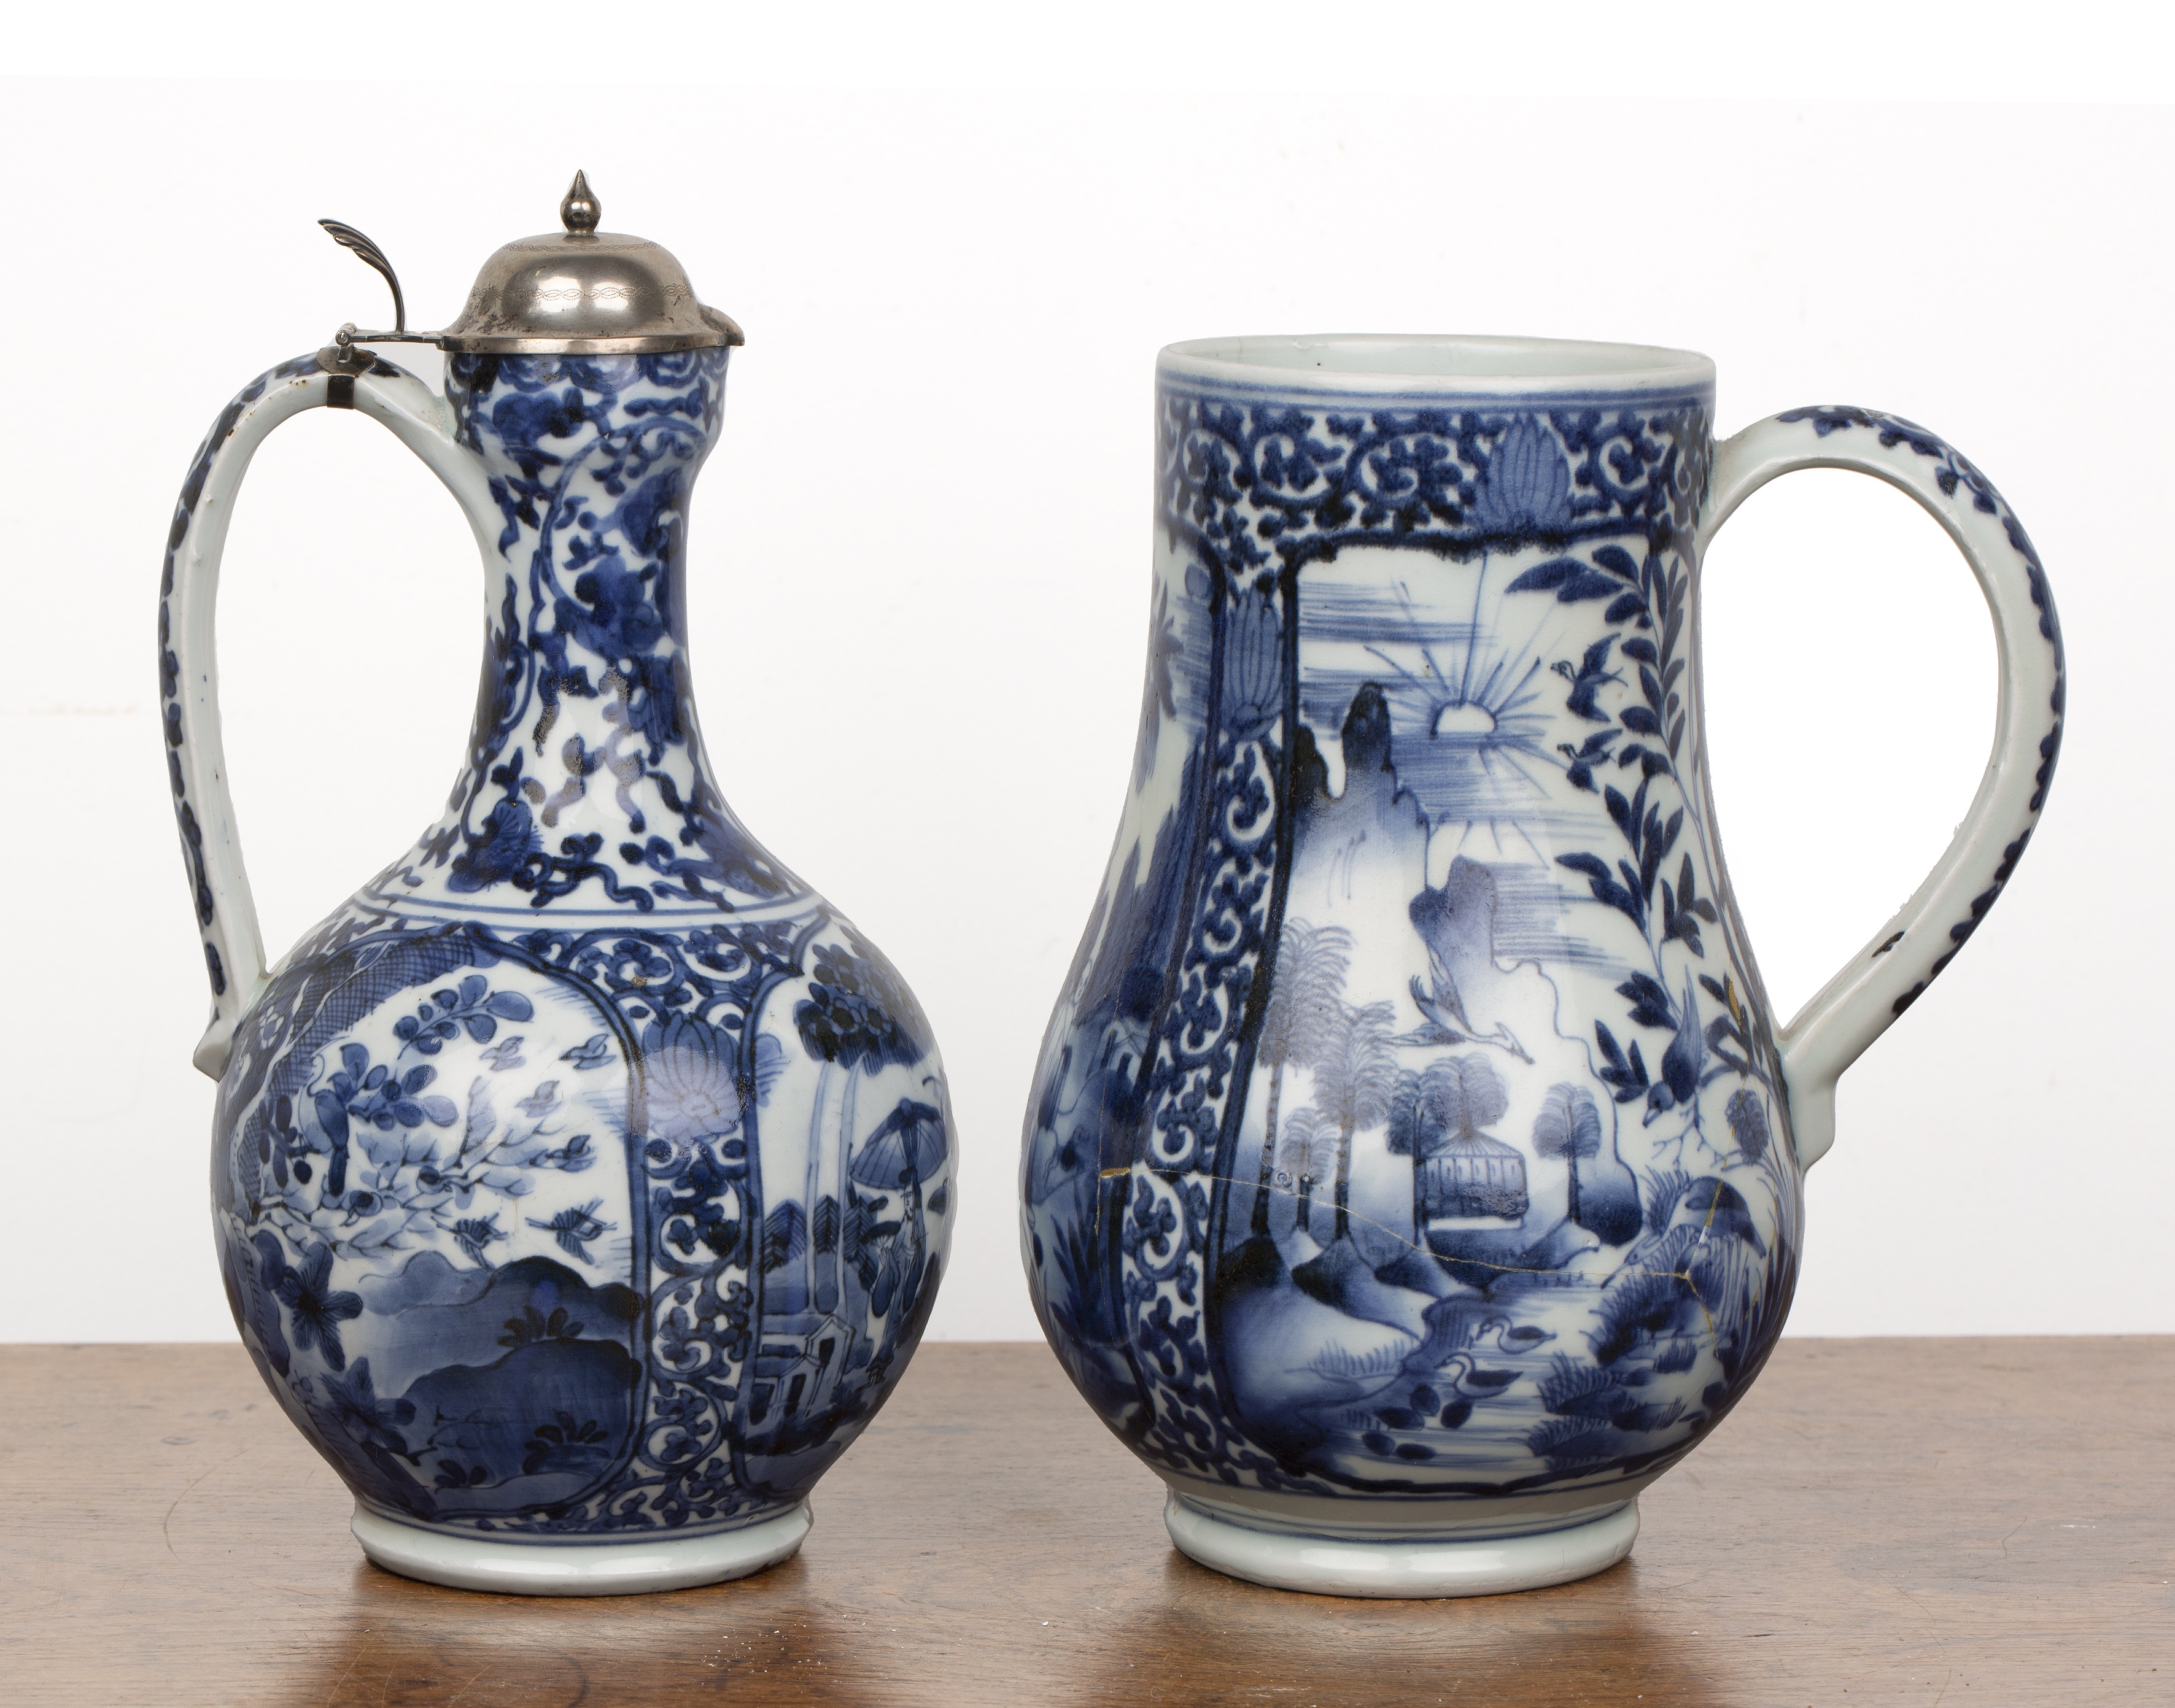 Blue and white porcelain Arita and a tankard Japanese, circa 1700 both with panels of landscape - Image 2 of 6